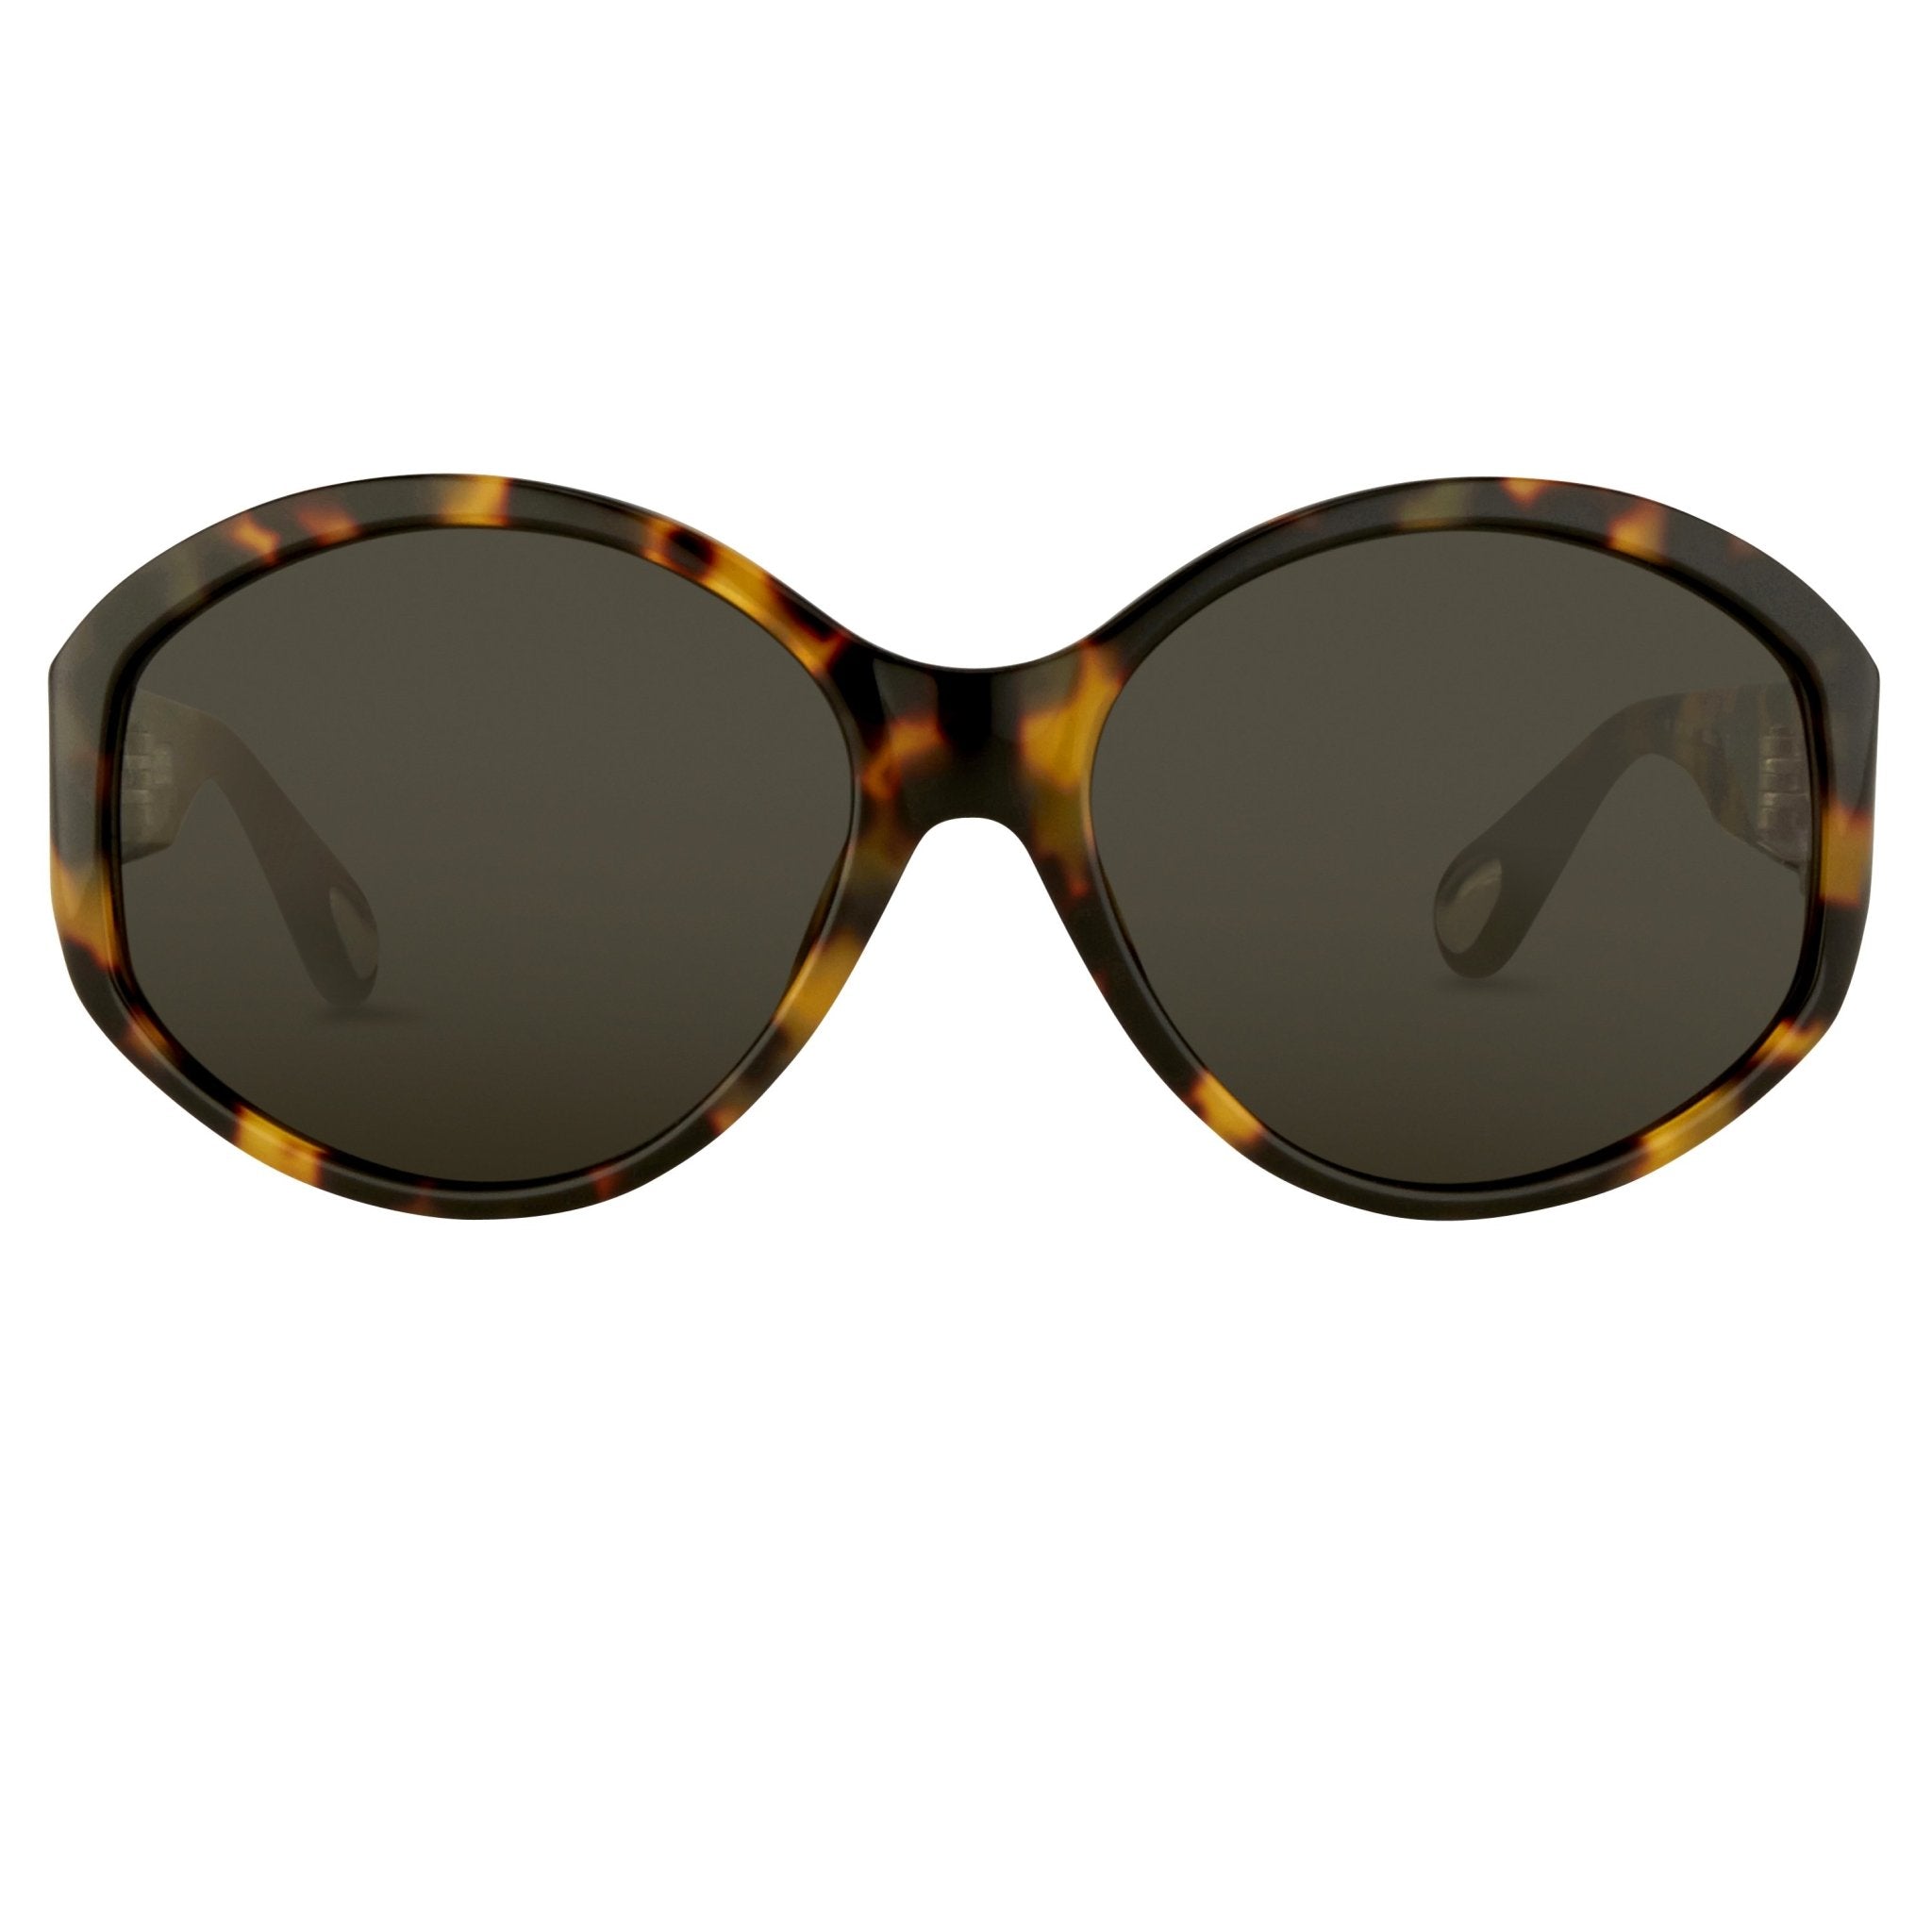 Ann Demeulemeester Sunglasses Oversized Tortoise Shell 925 Silver with Grey Lenses CAT3 AD6C2SUN - Watches & Crystals